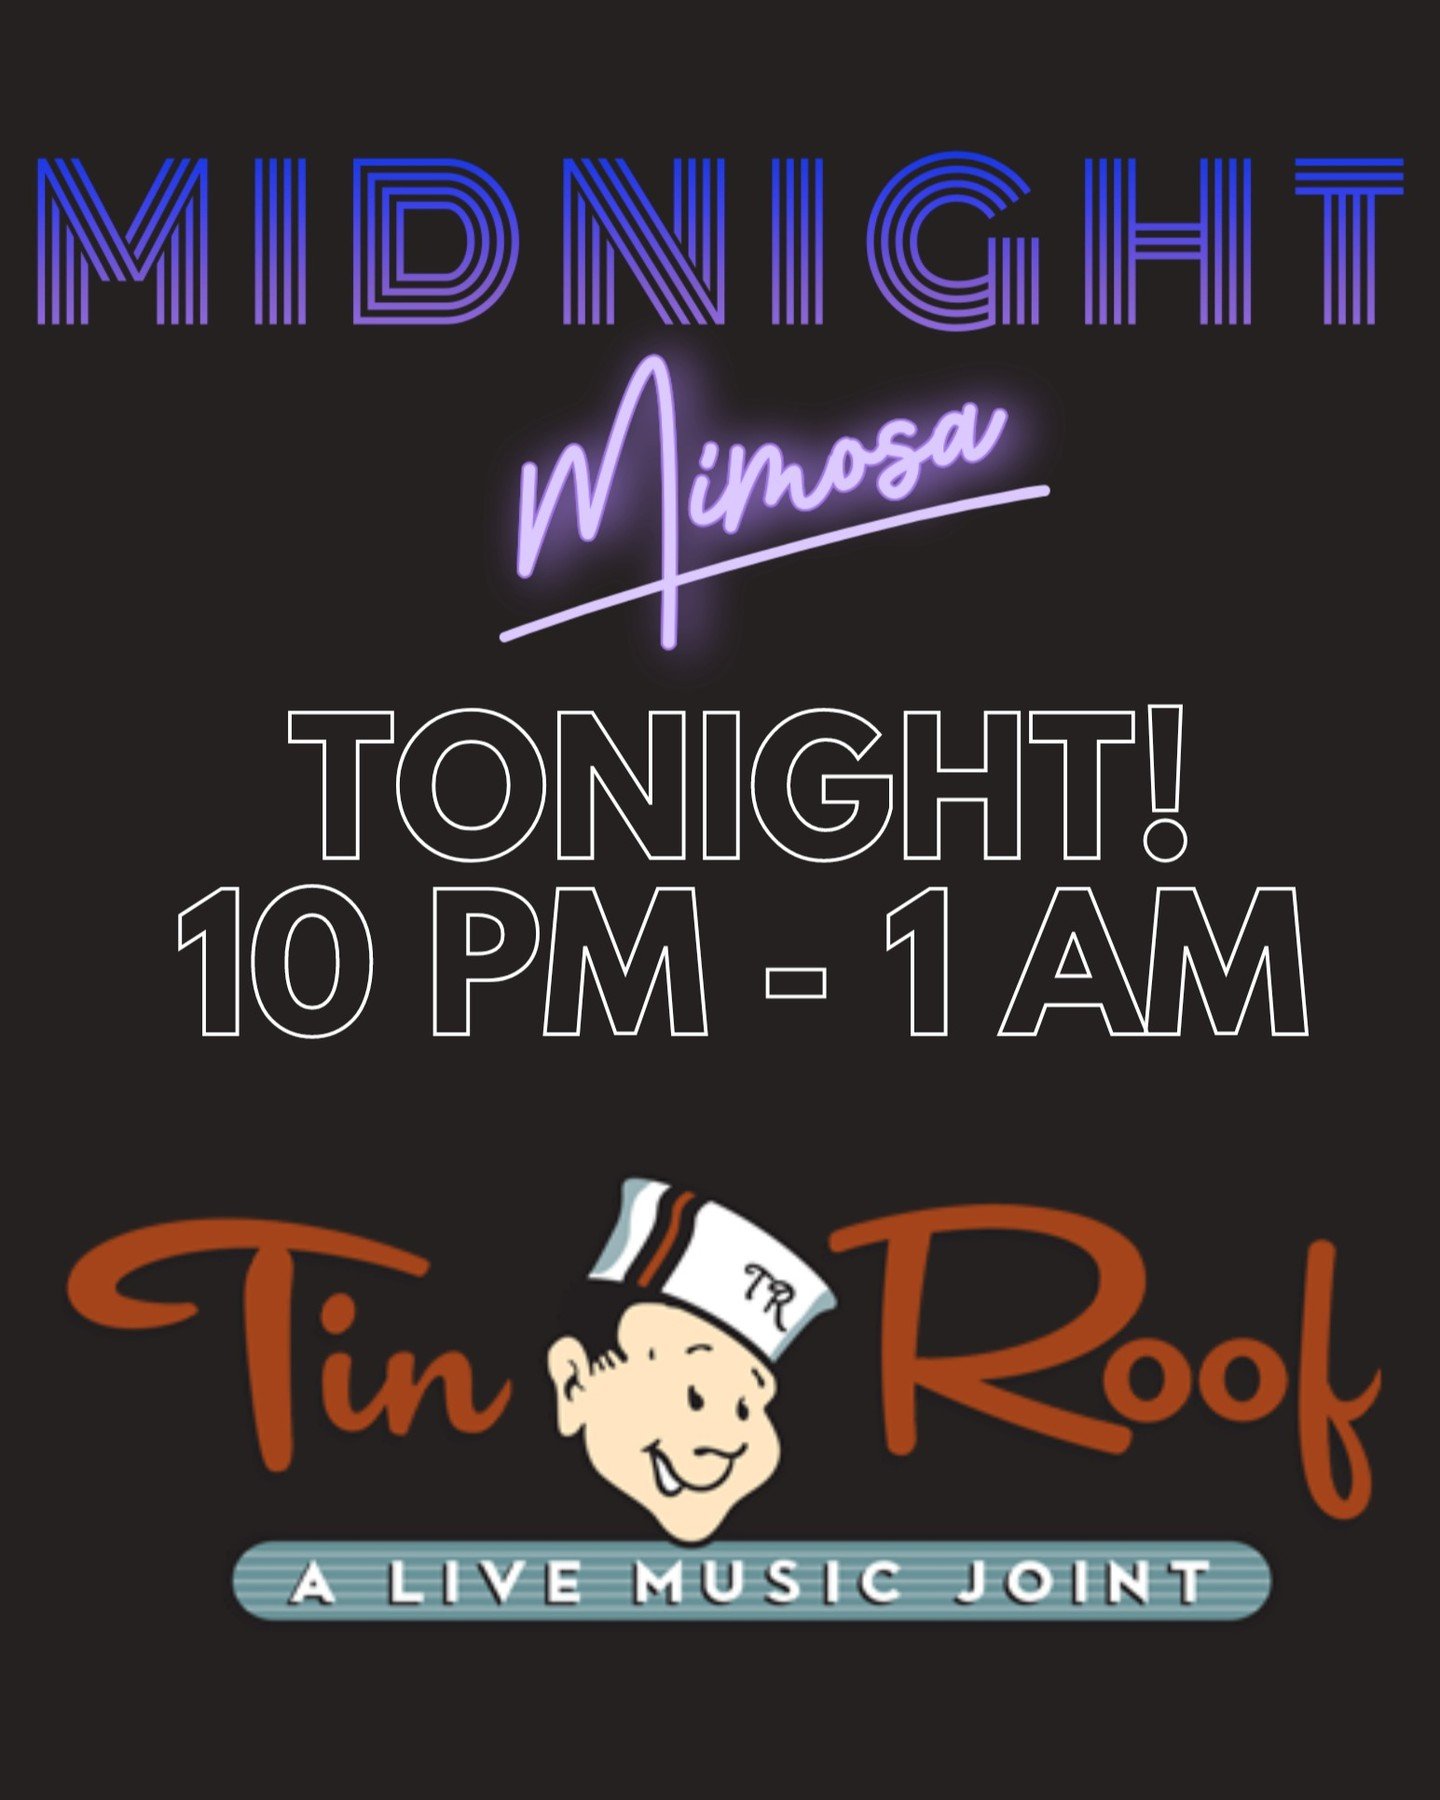 Baltimore! We are back at @tinroofbaltimore TONIGHT bringing the good vibes. Can't wait! 🙌